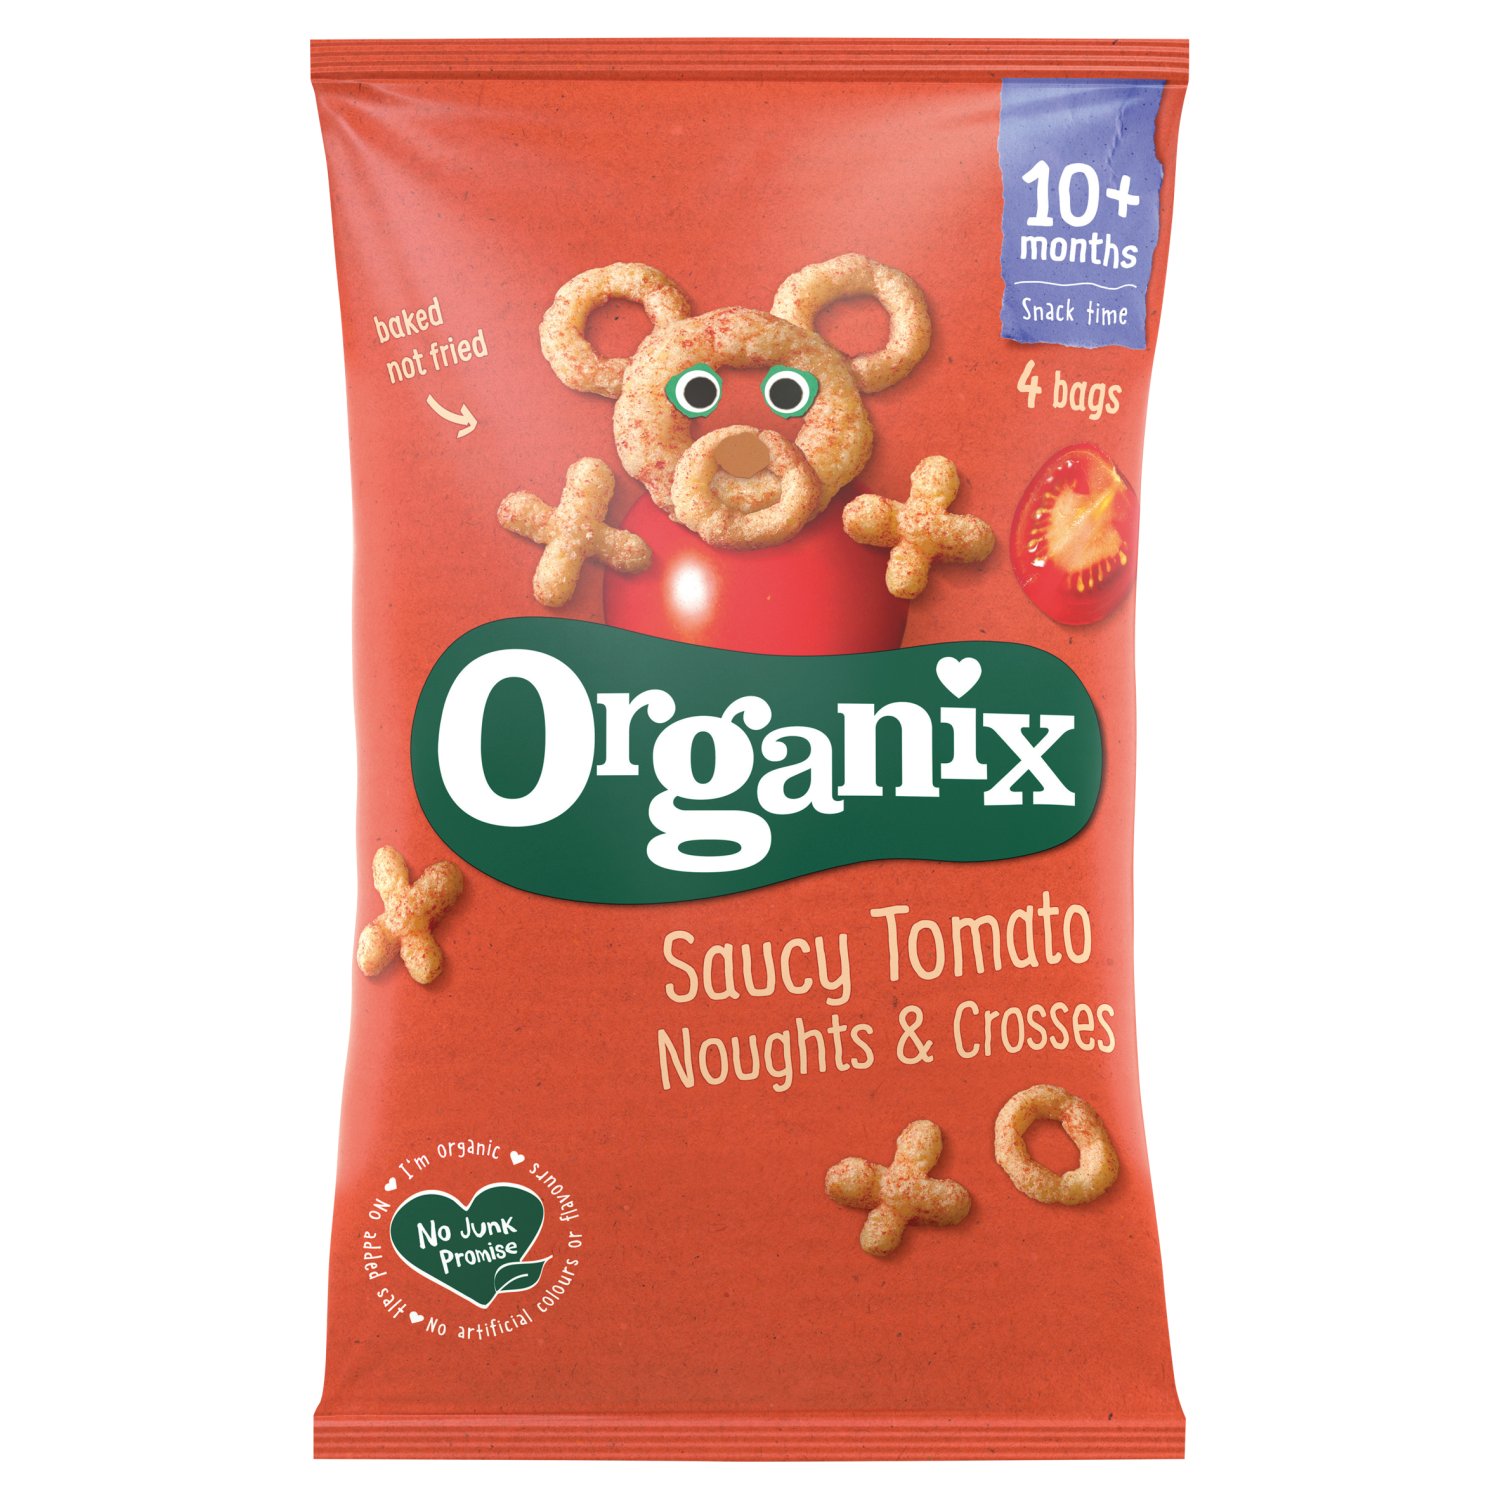 Organix Saucy Tomato Noughts & Crosses 10+ Months 4 Pack (60 g)